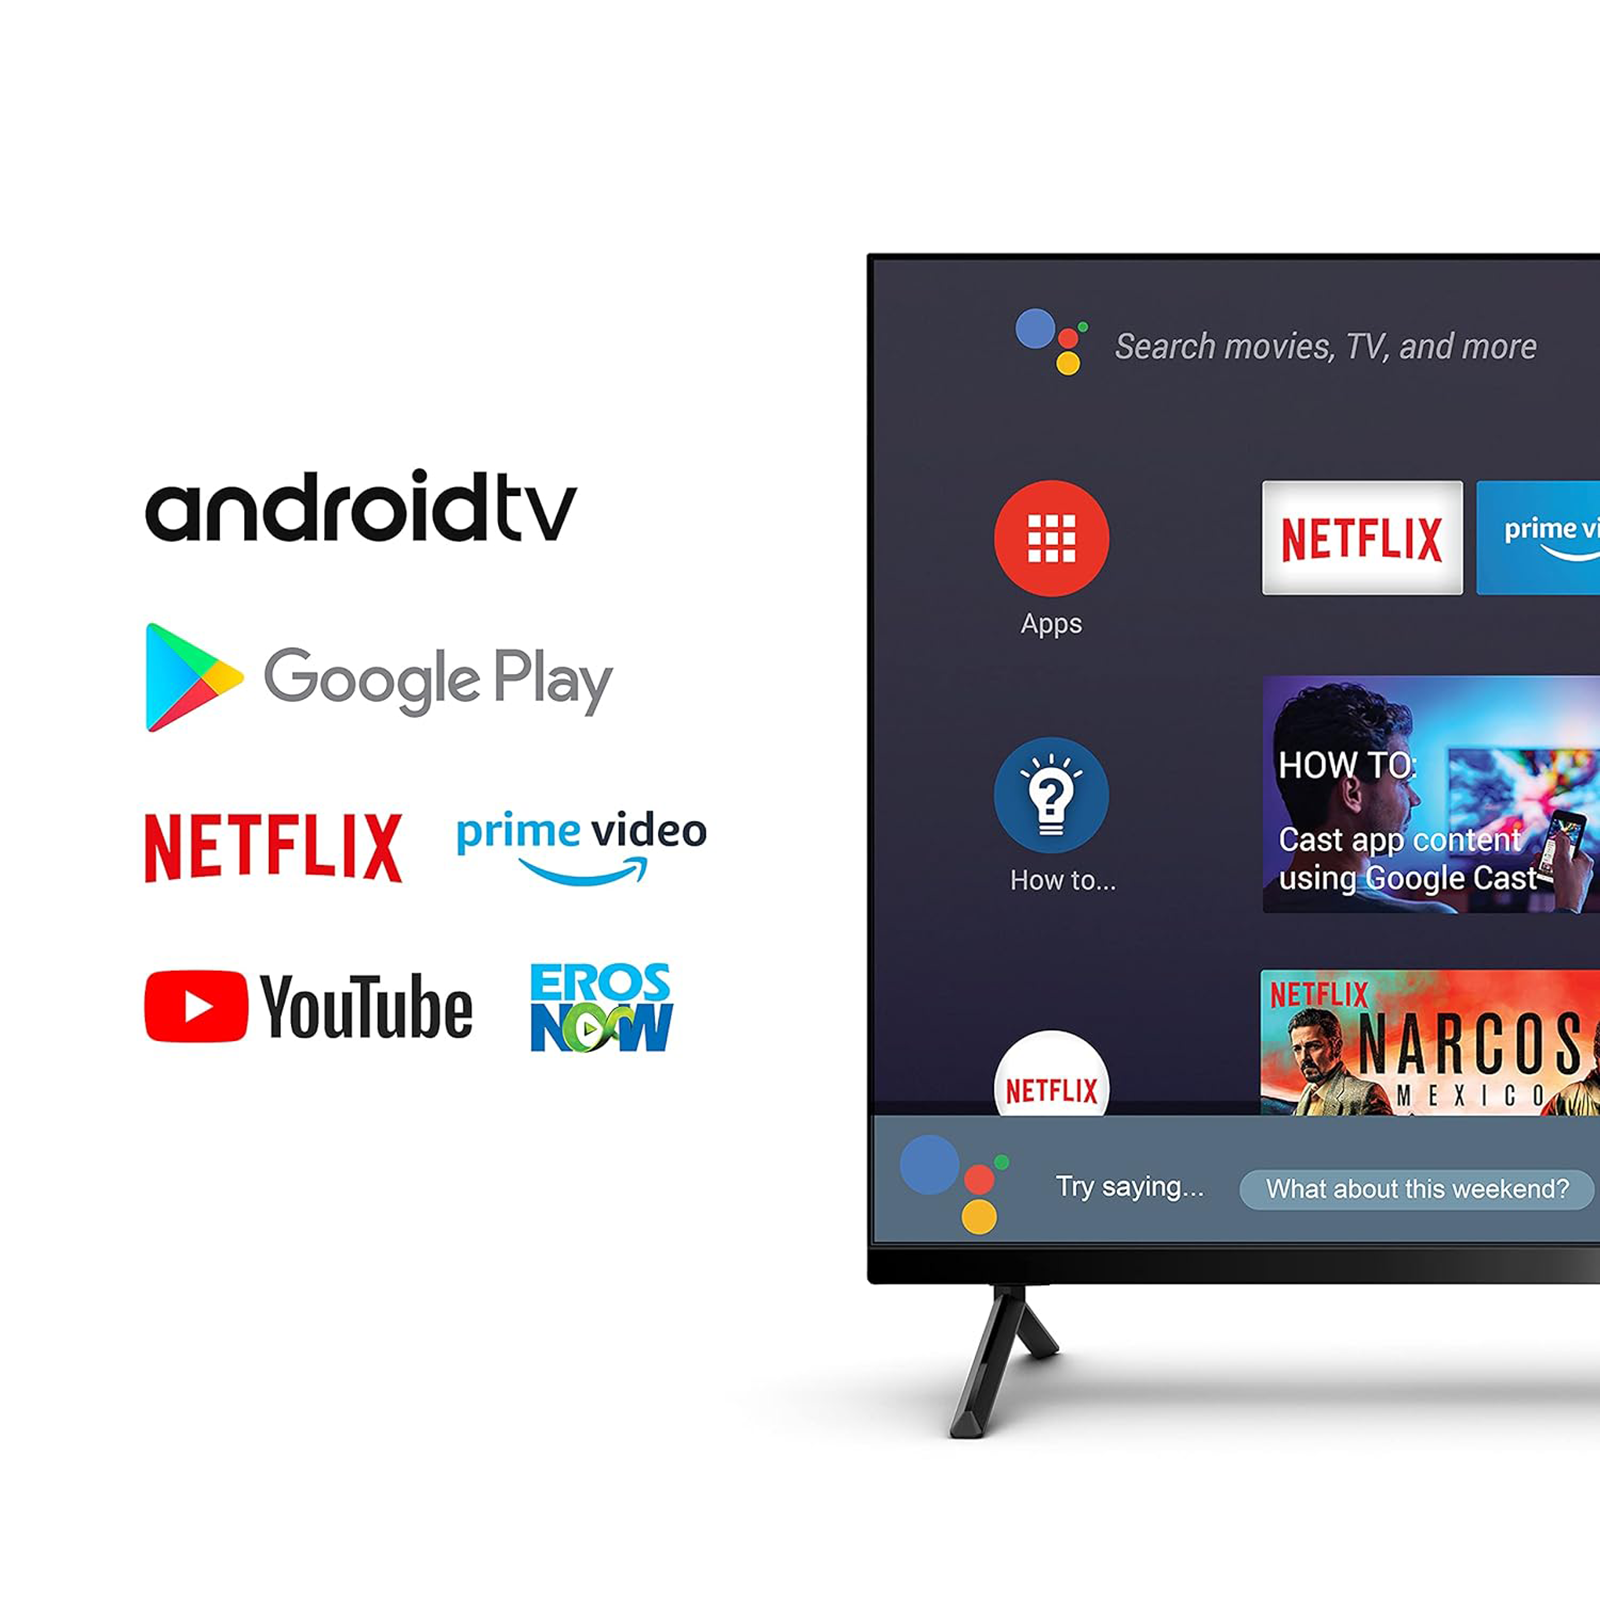 Android TV Philips LED Full HD 43 Serie 6900 Blanco